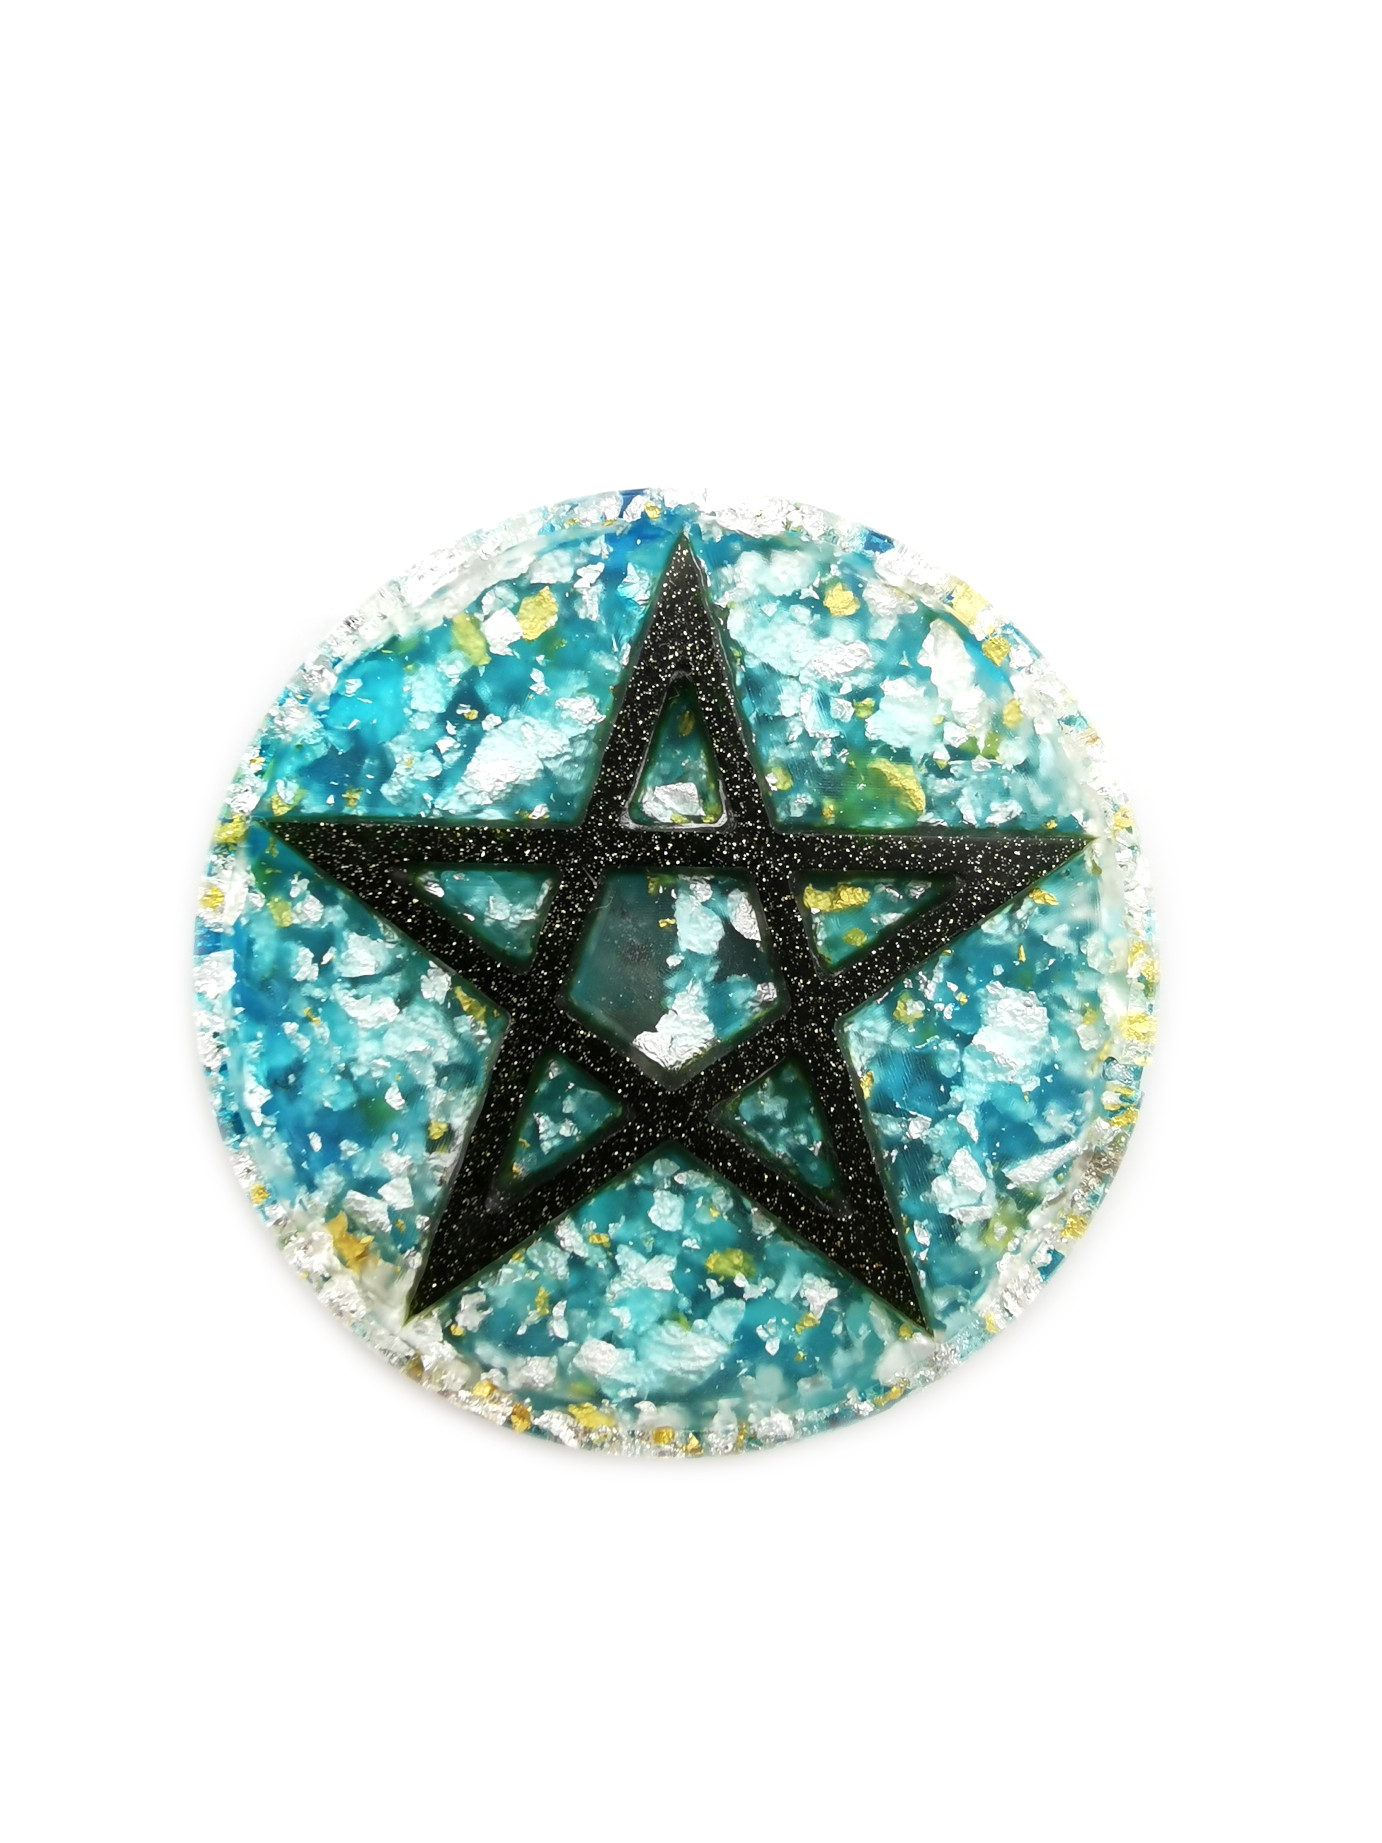 Black and Blue Pentagram Powerful Orgone Puck by OrgoneVibes